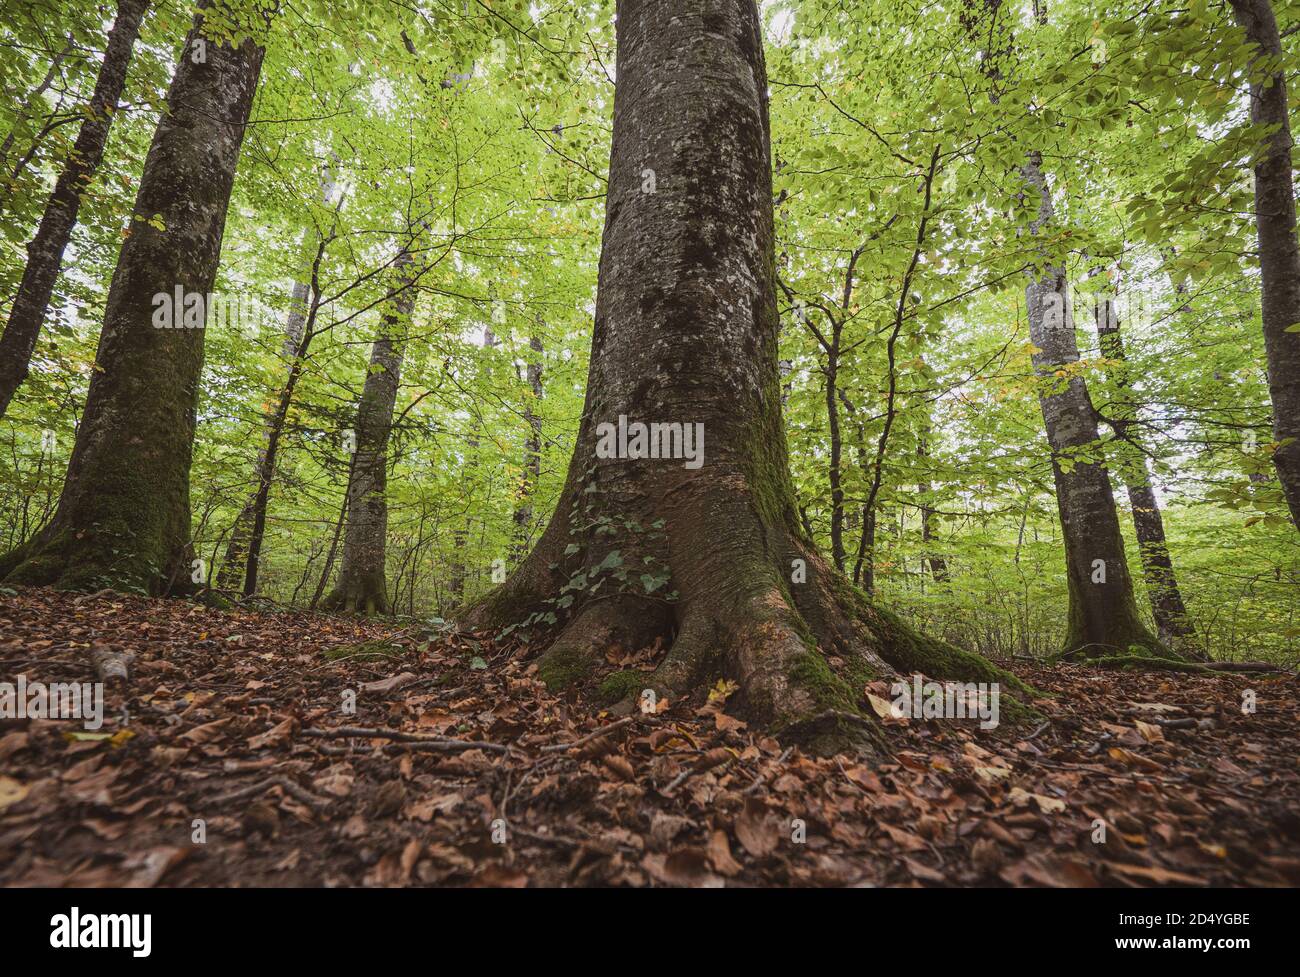 Wide angle shot of tall trees and foreground trunks and branches in a autumn fall forest covered in fallen leaves on a lush atmospheric day. Stock Photo